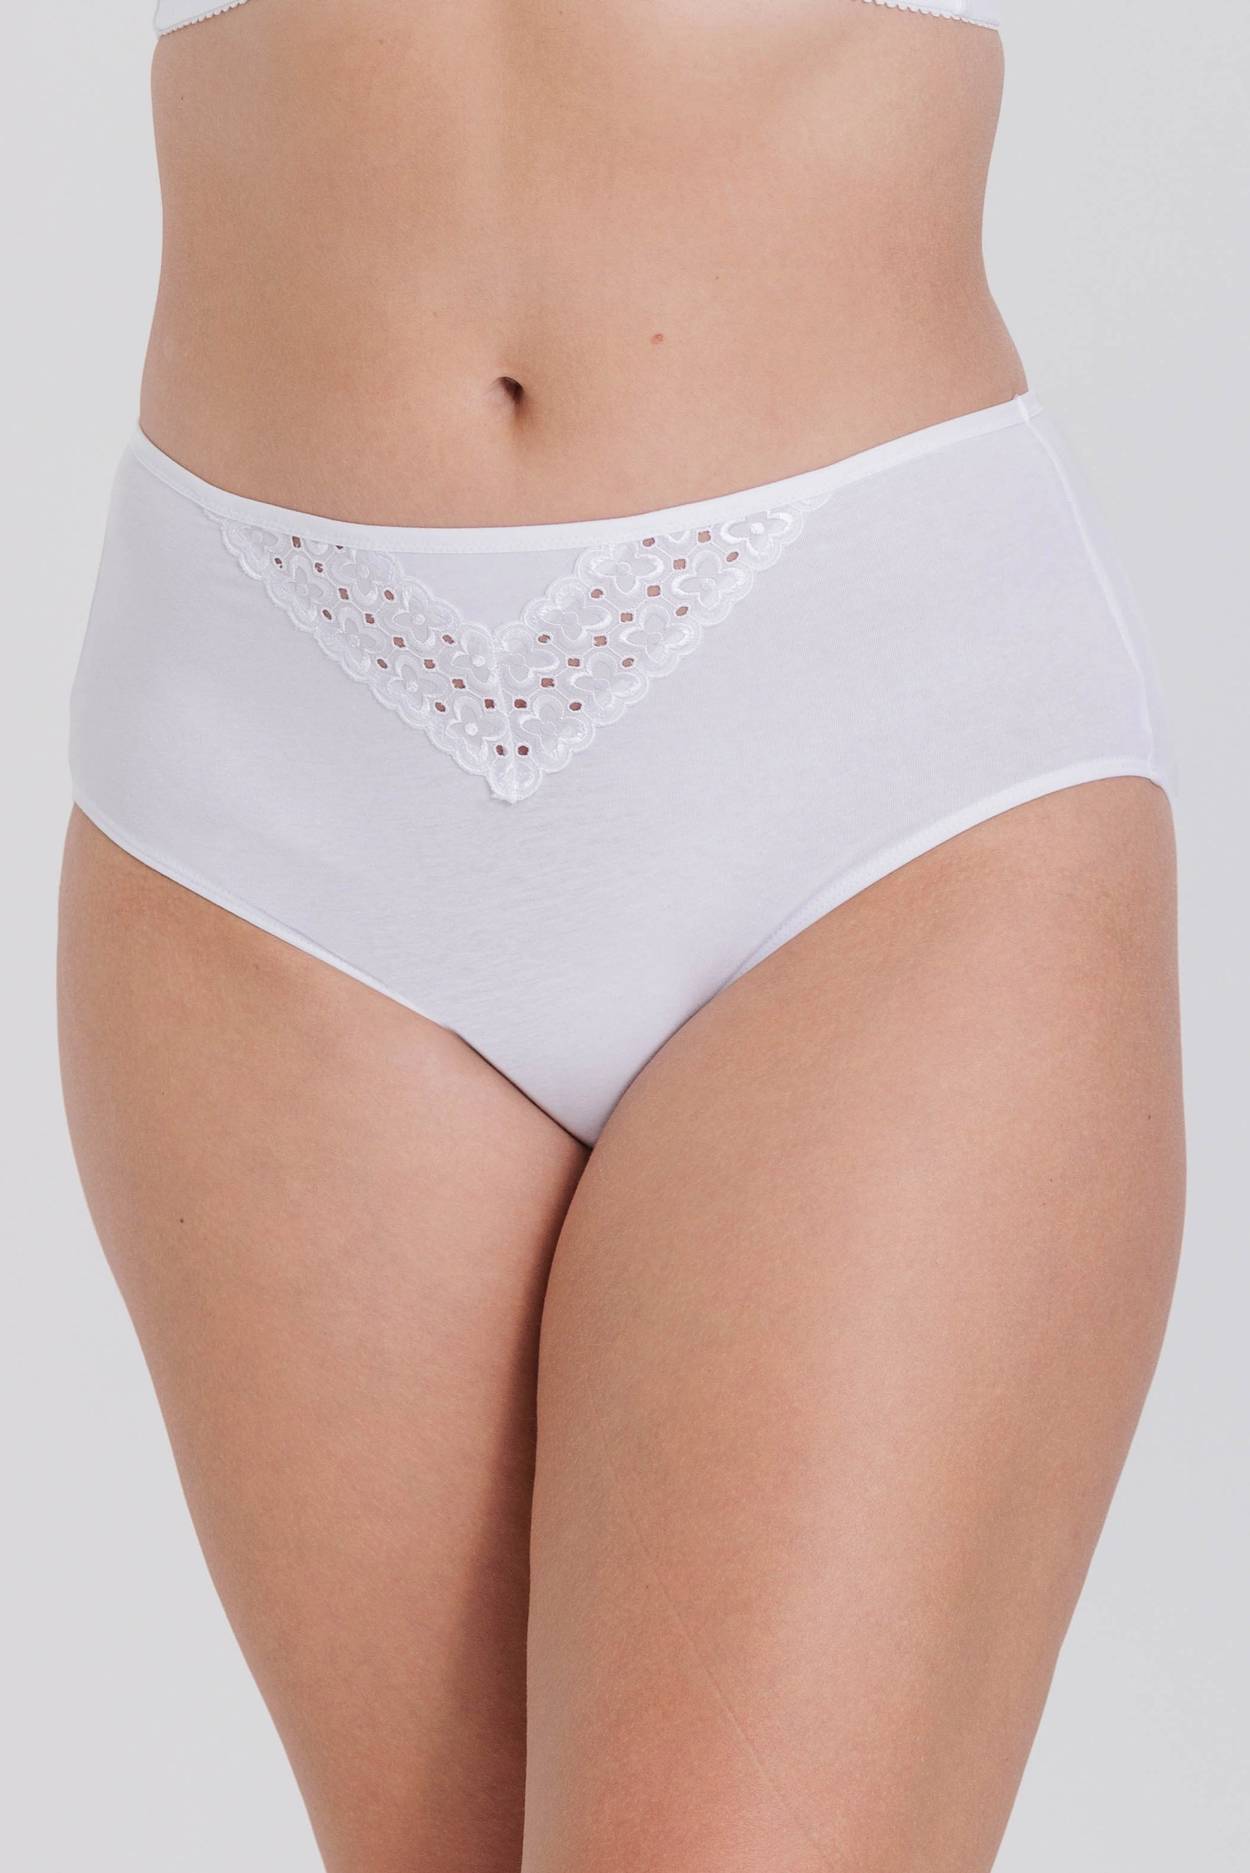 Broderie anglaise panty girdle